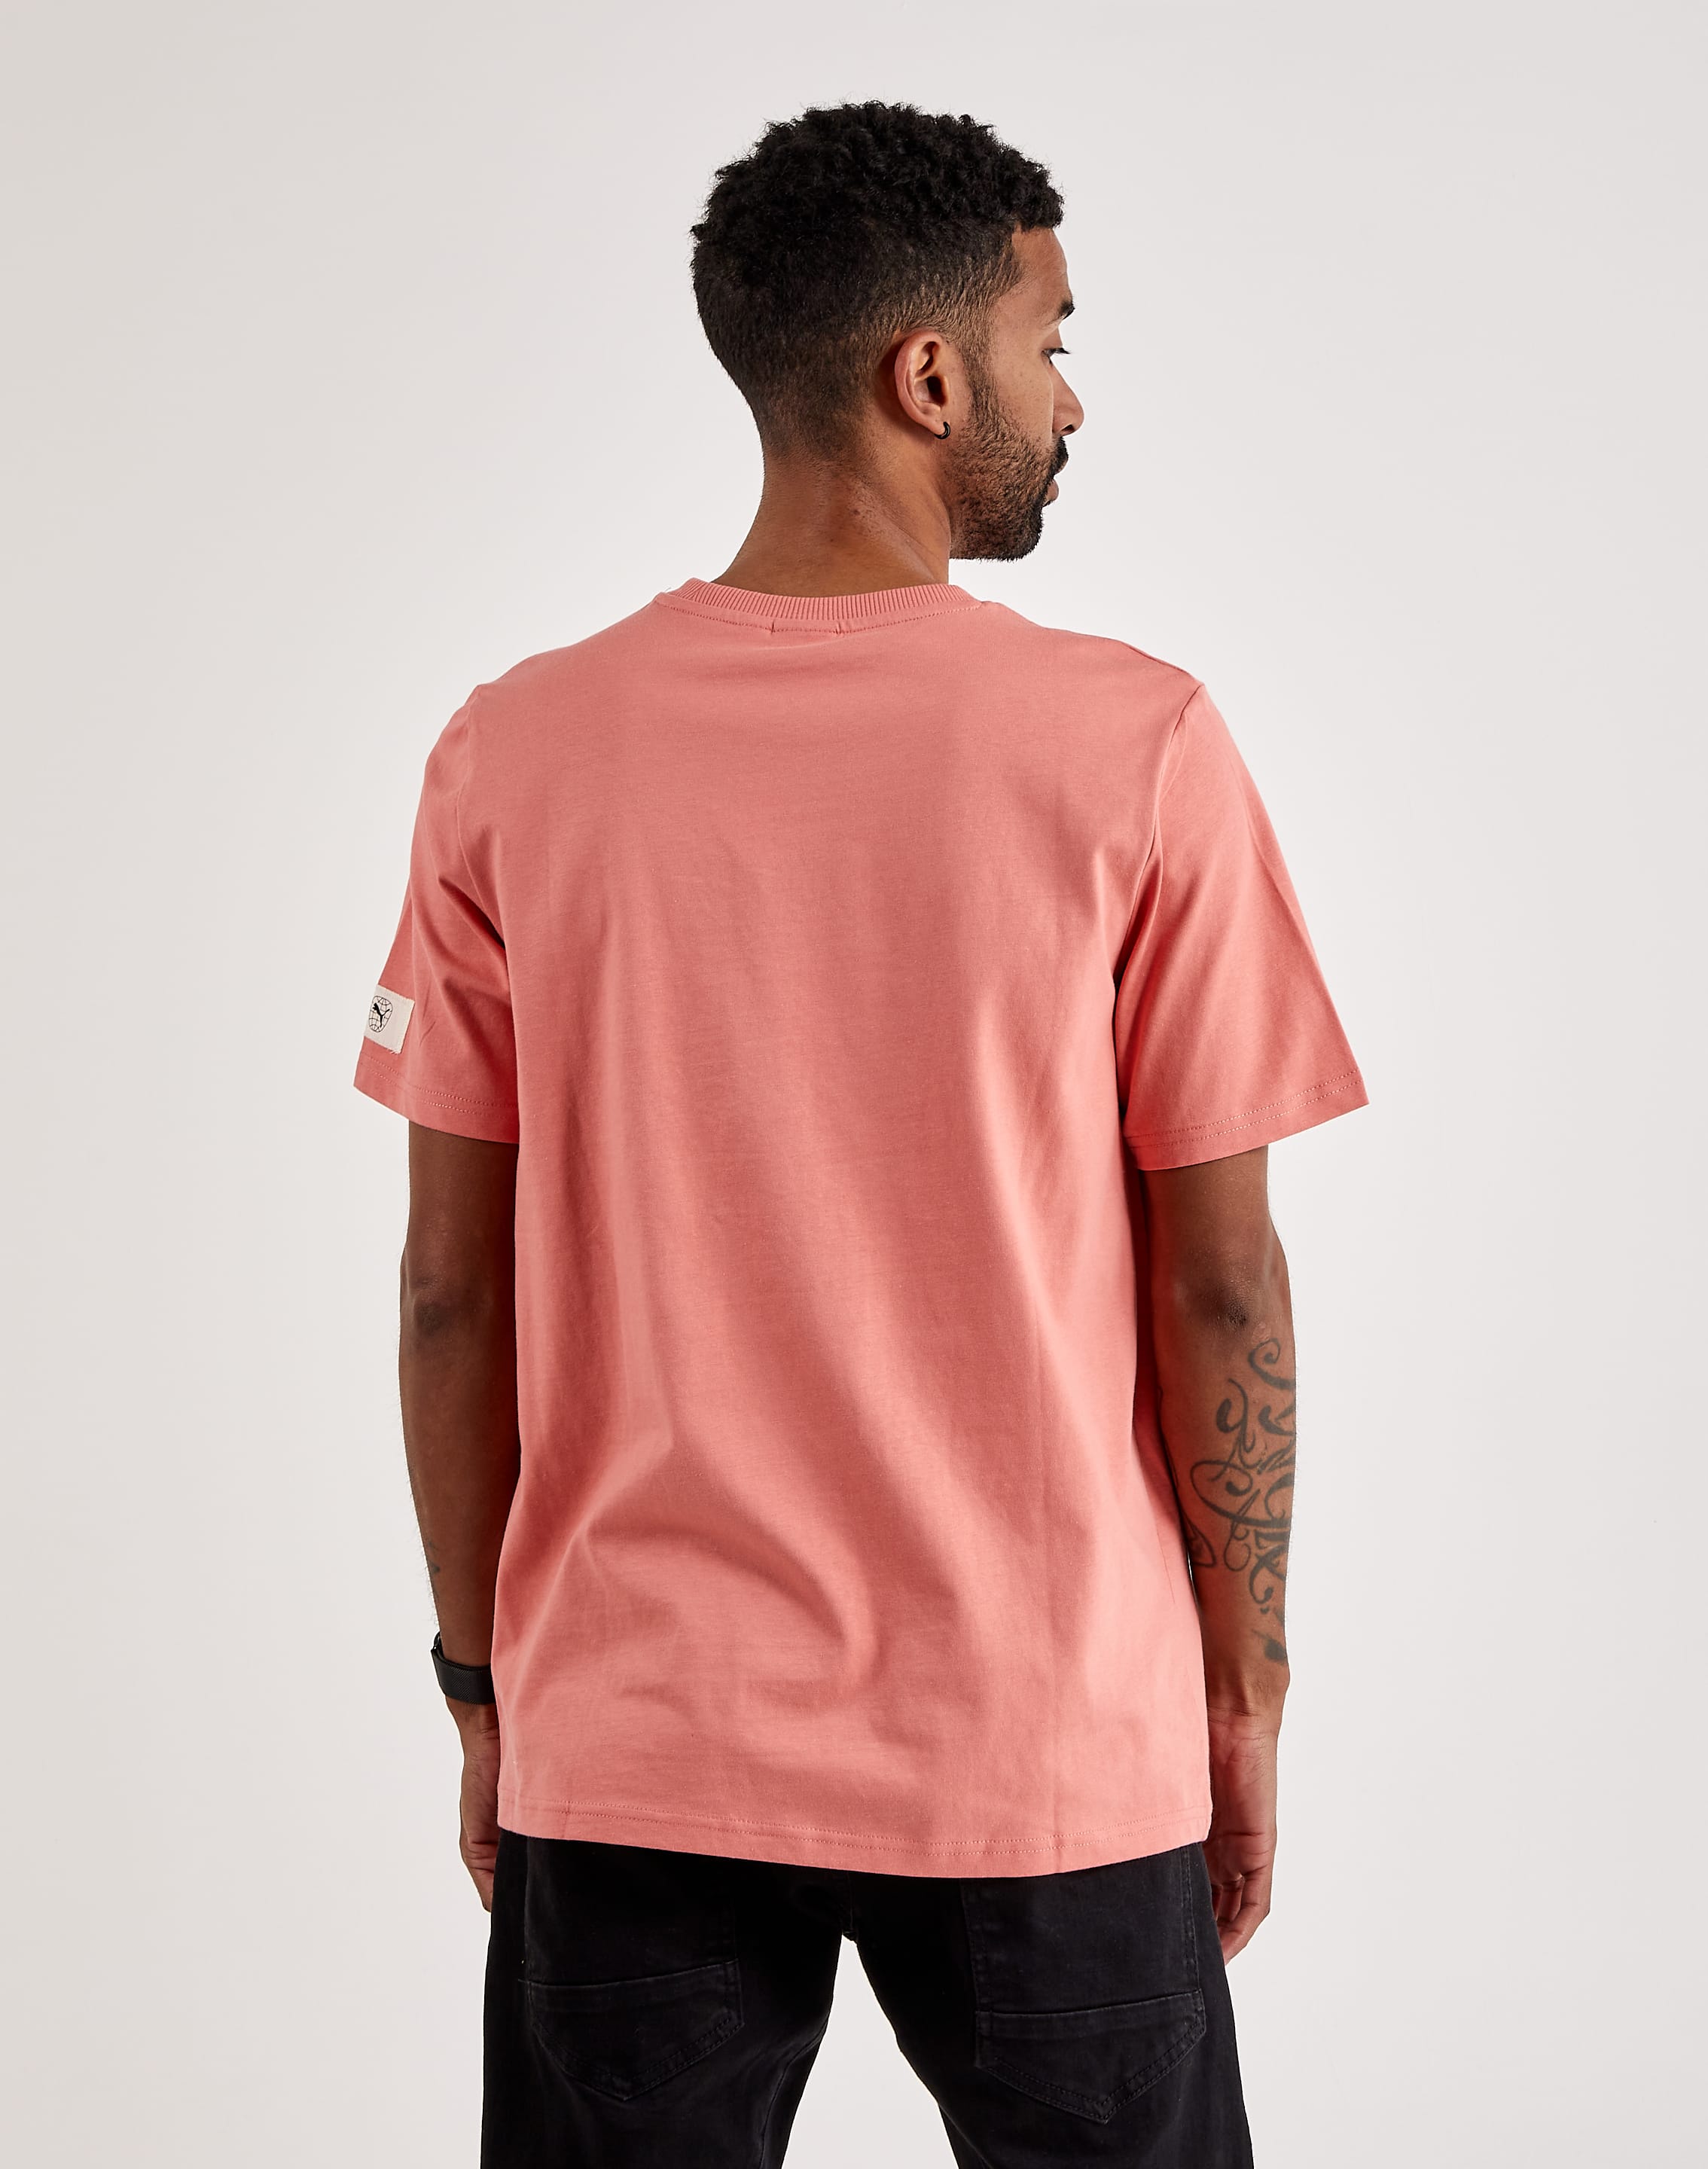 Puma Re:Escape Rotate – DTLR Tee